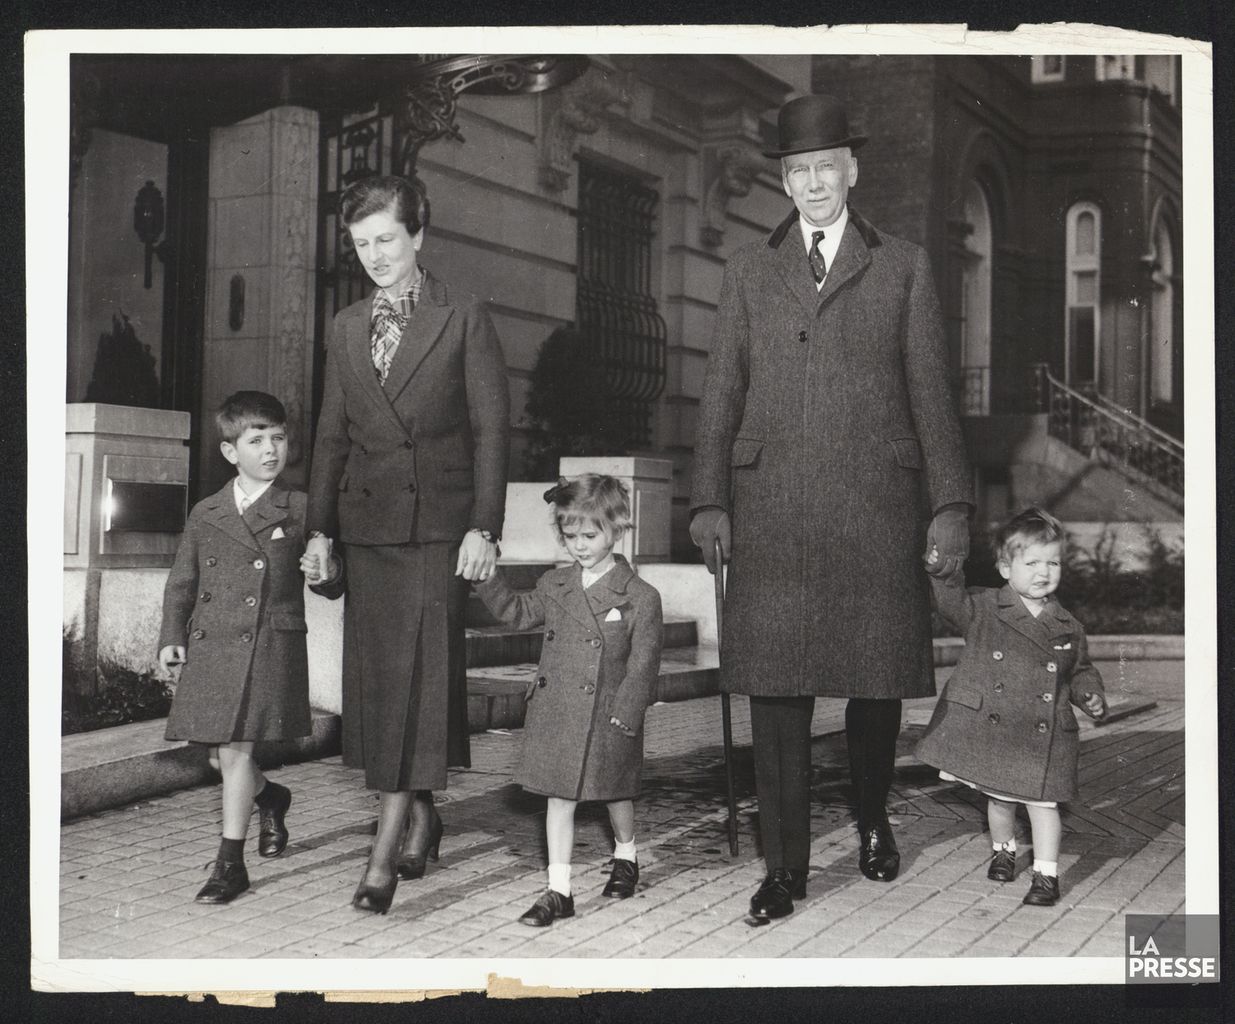 Black and white photograph of two parents and their three young children walking hand in hand on a sidewalk, in front of stone buildings.